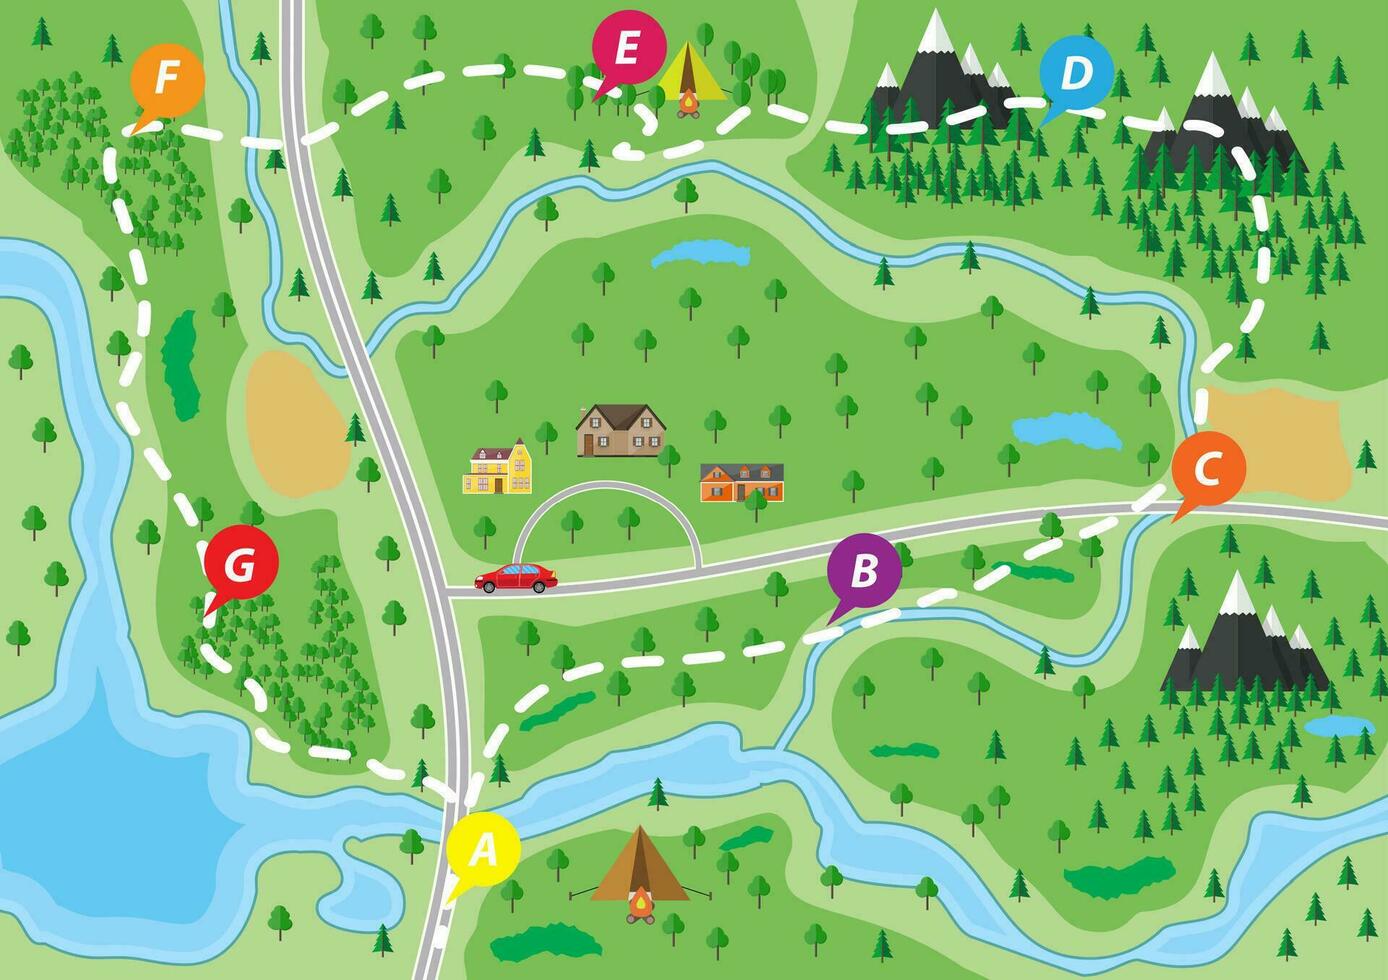 Suburban map with houses with car, trees, road, river, mountain and camp. Village. Vector illustration in flat style